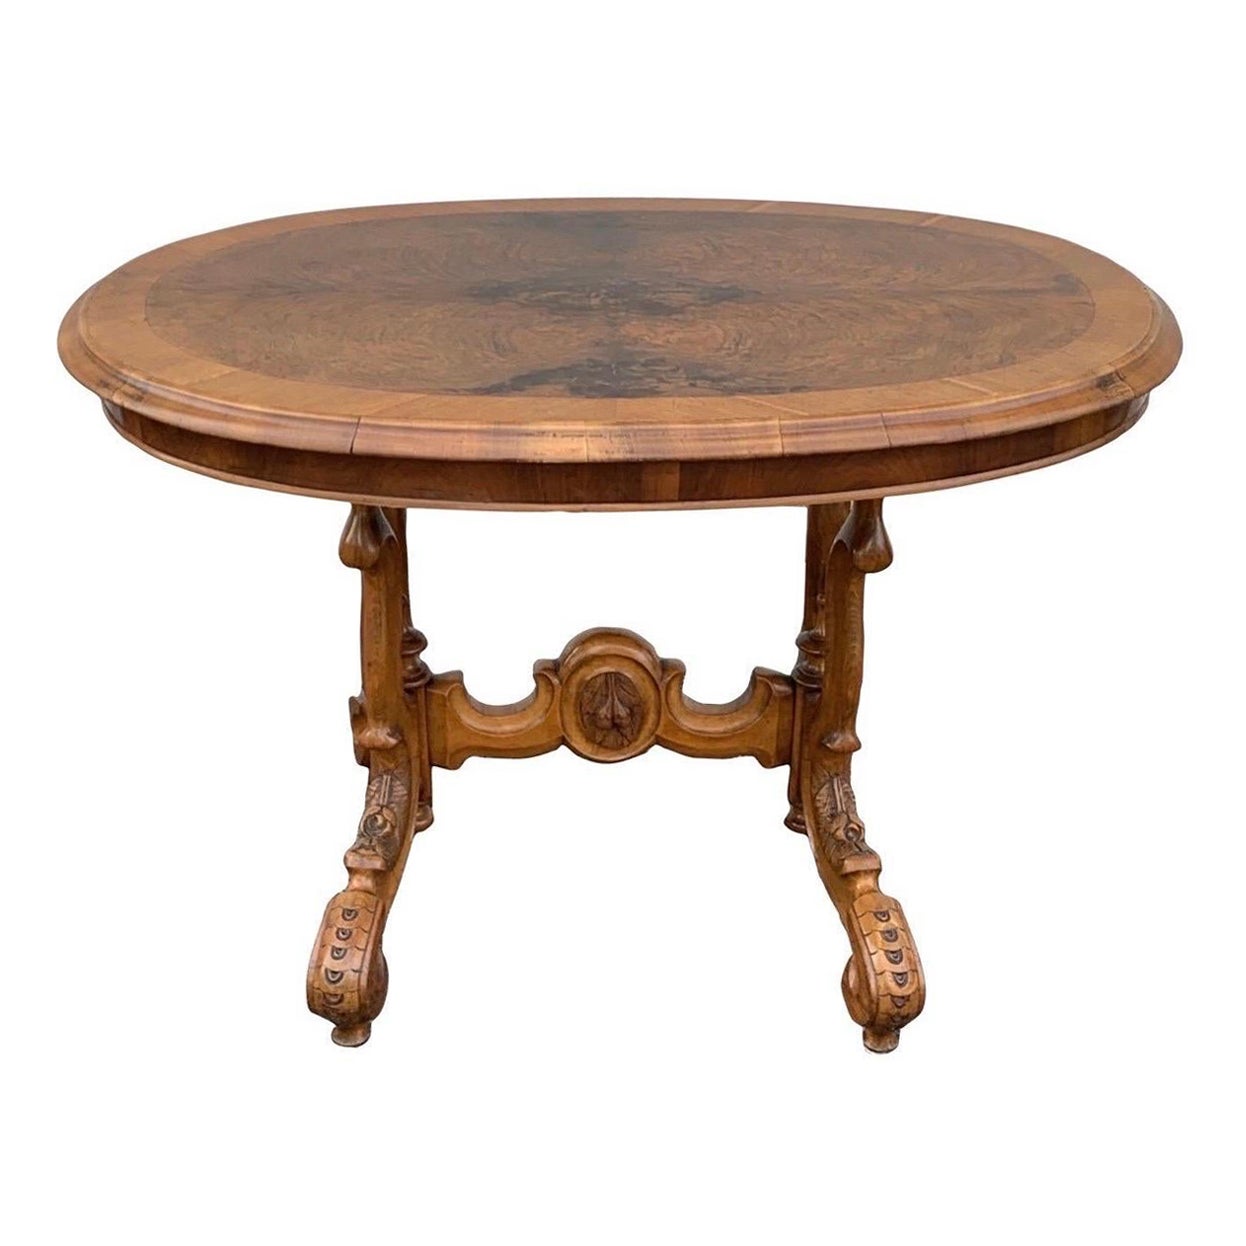 Antique French Carved Burl Walnut Oval Table